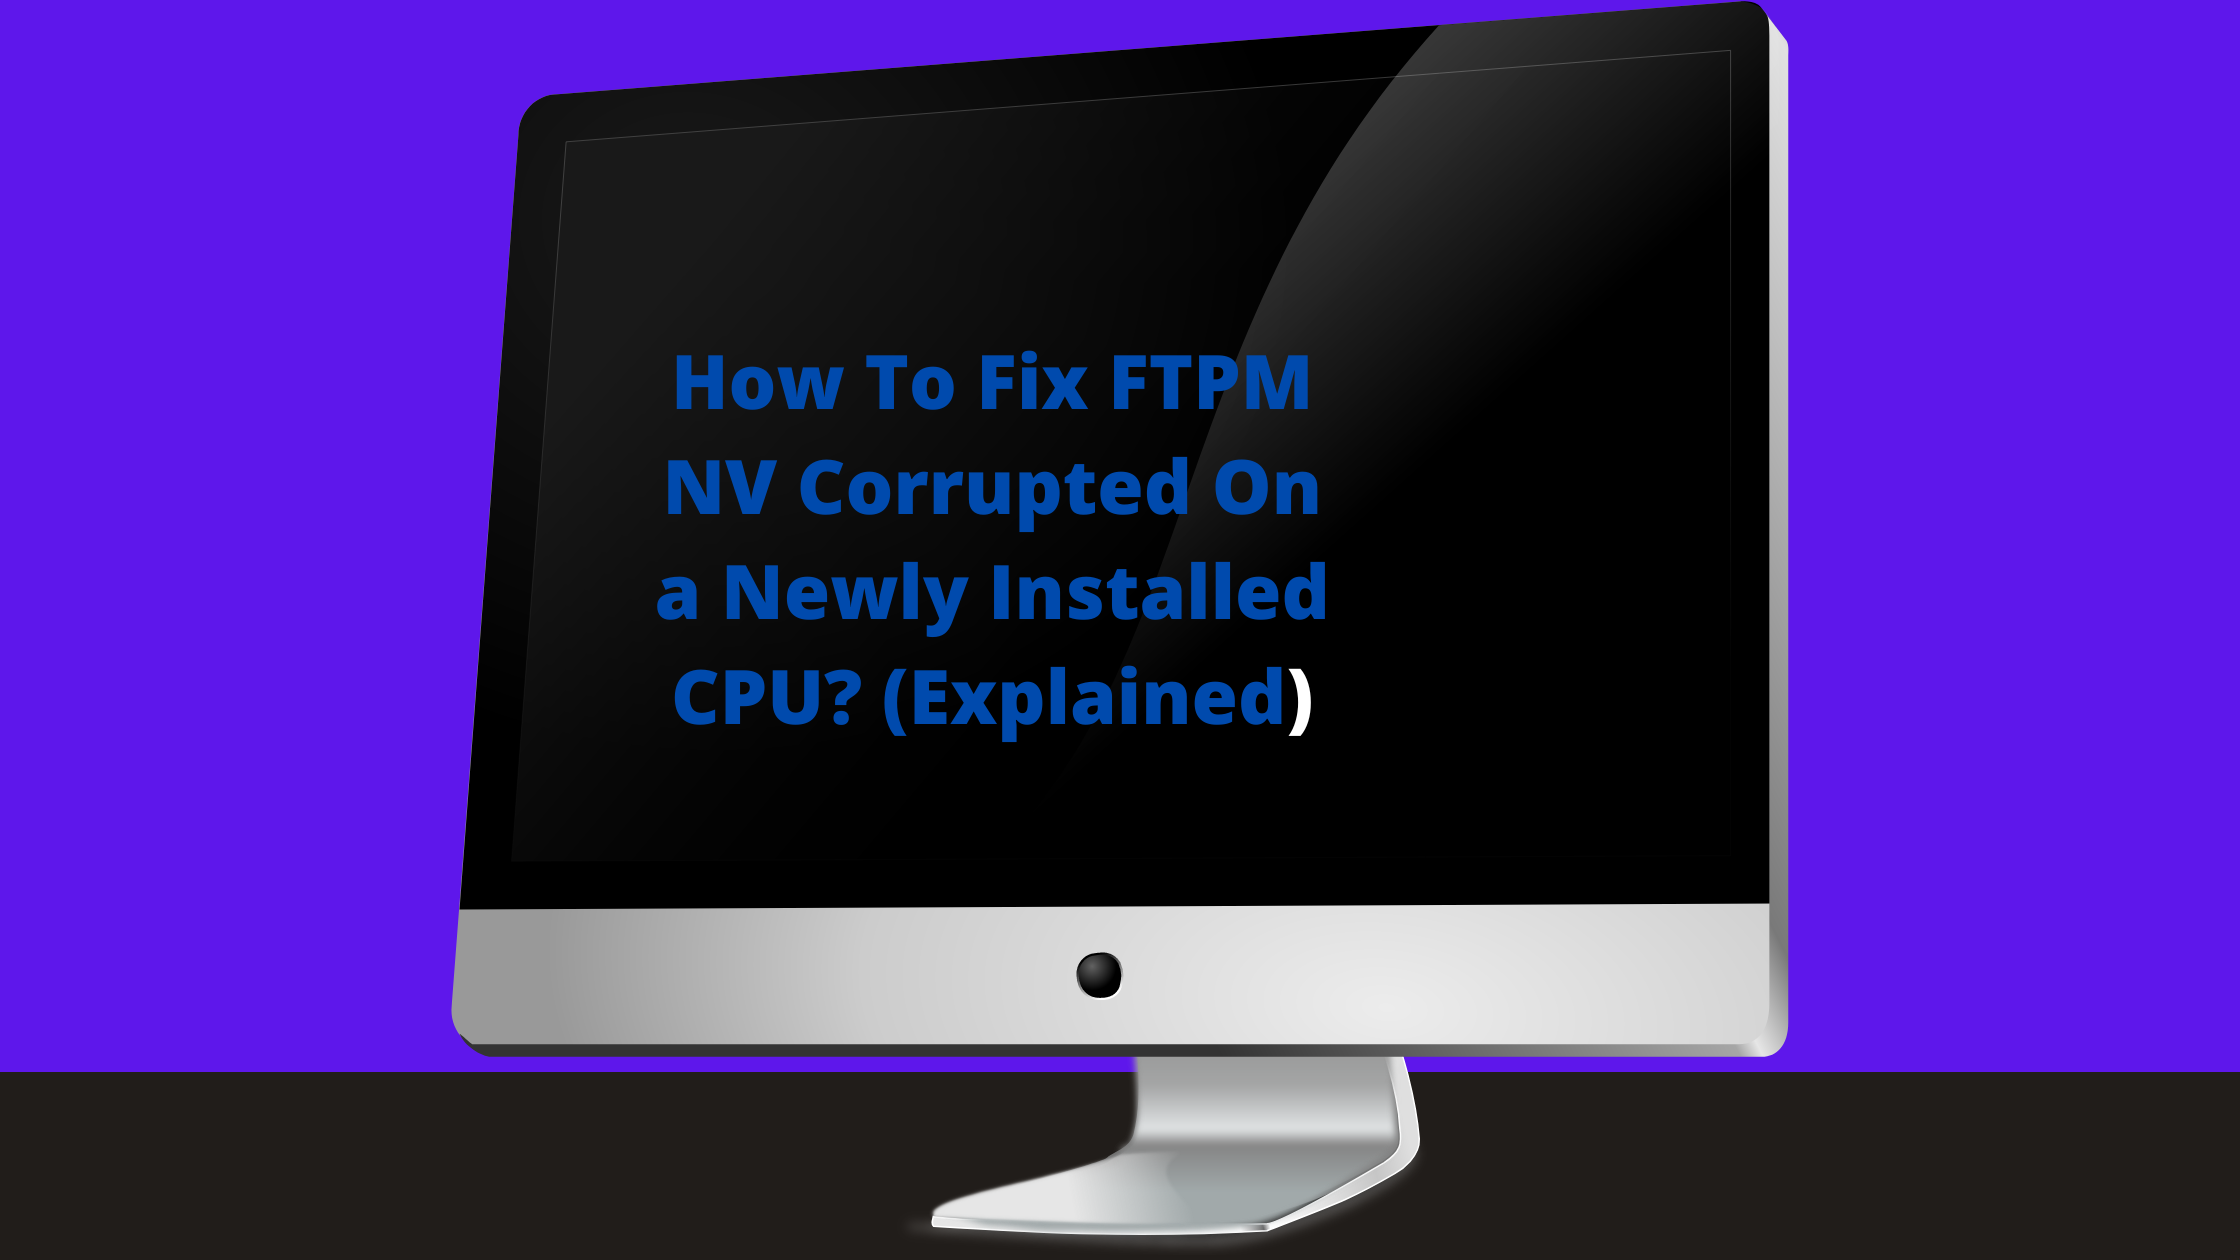 How Do I Fix FTPM NV Corrupted On a Newly Installed CPU? (Explained)